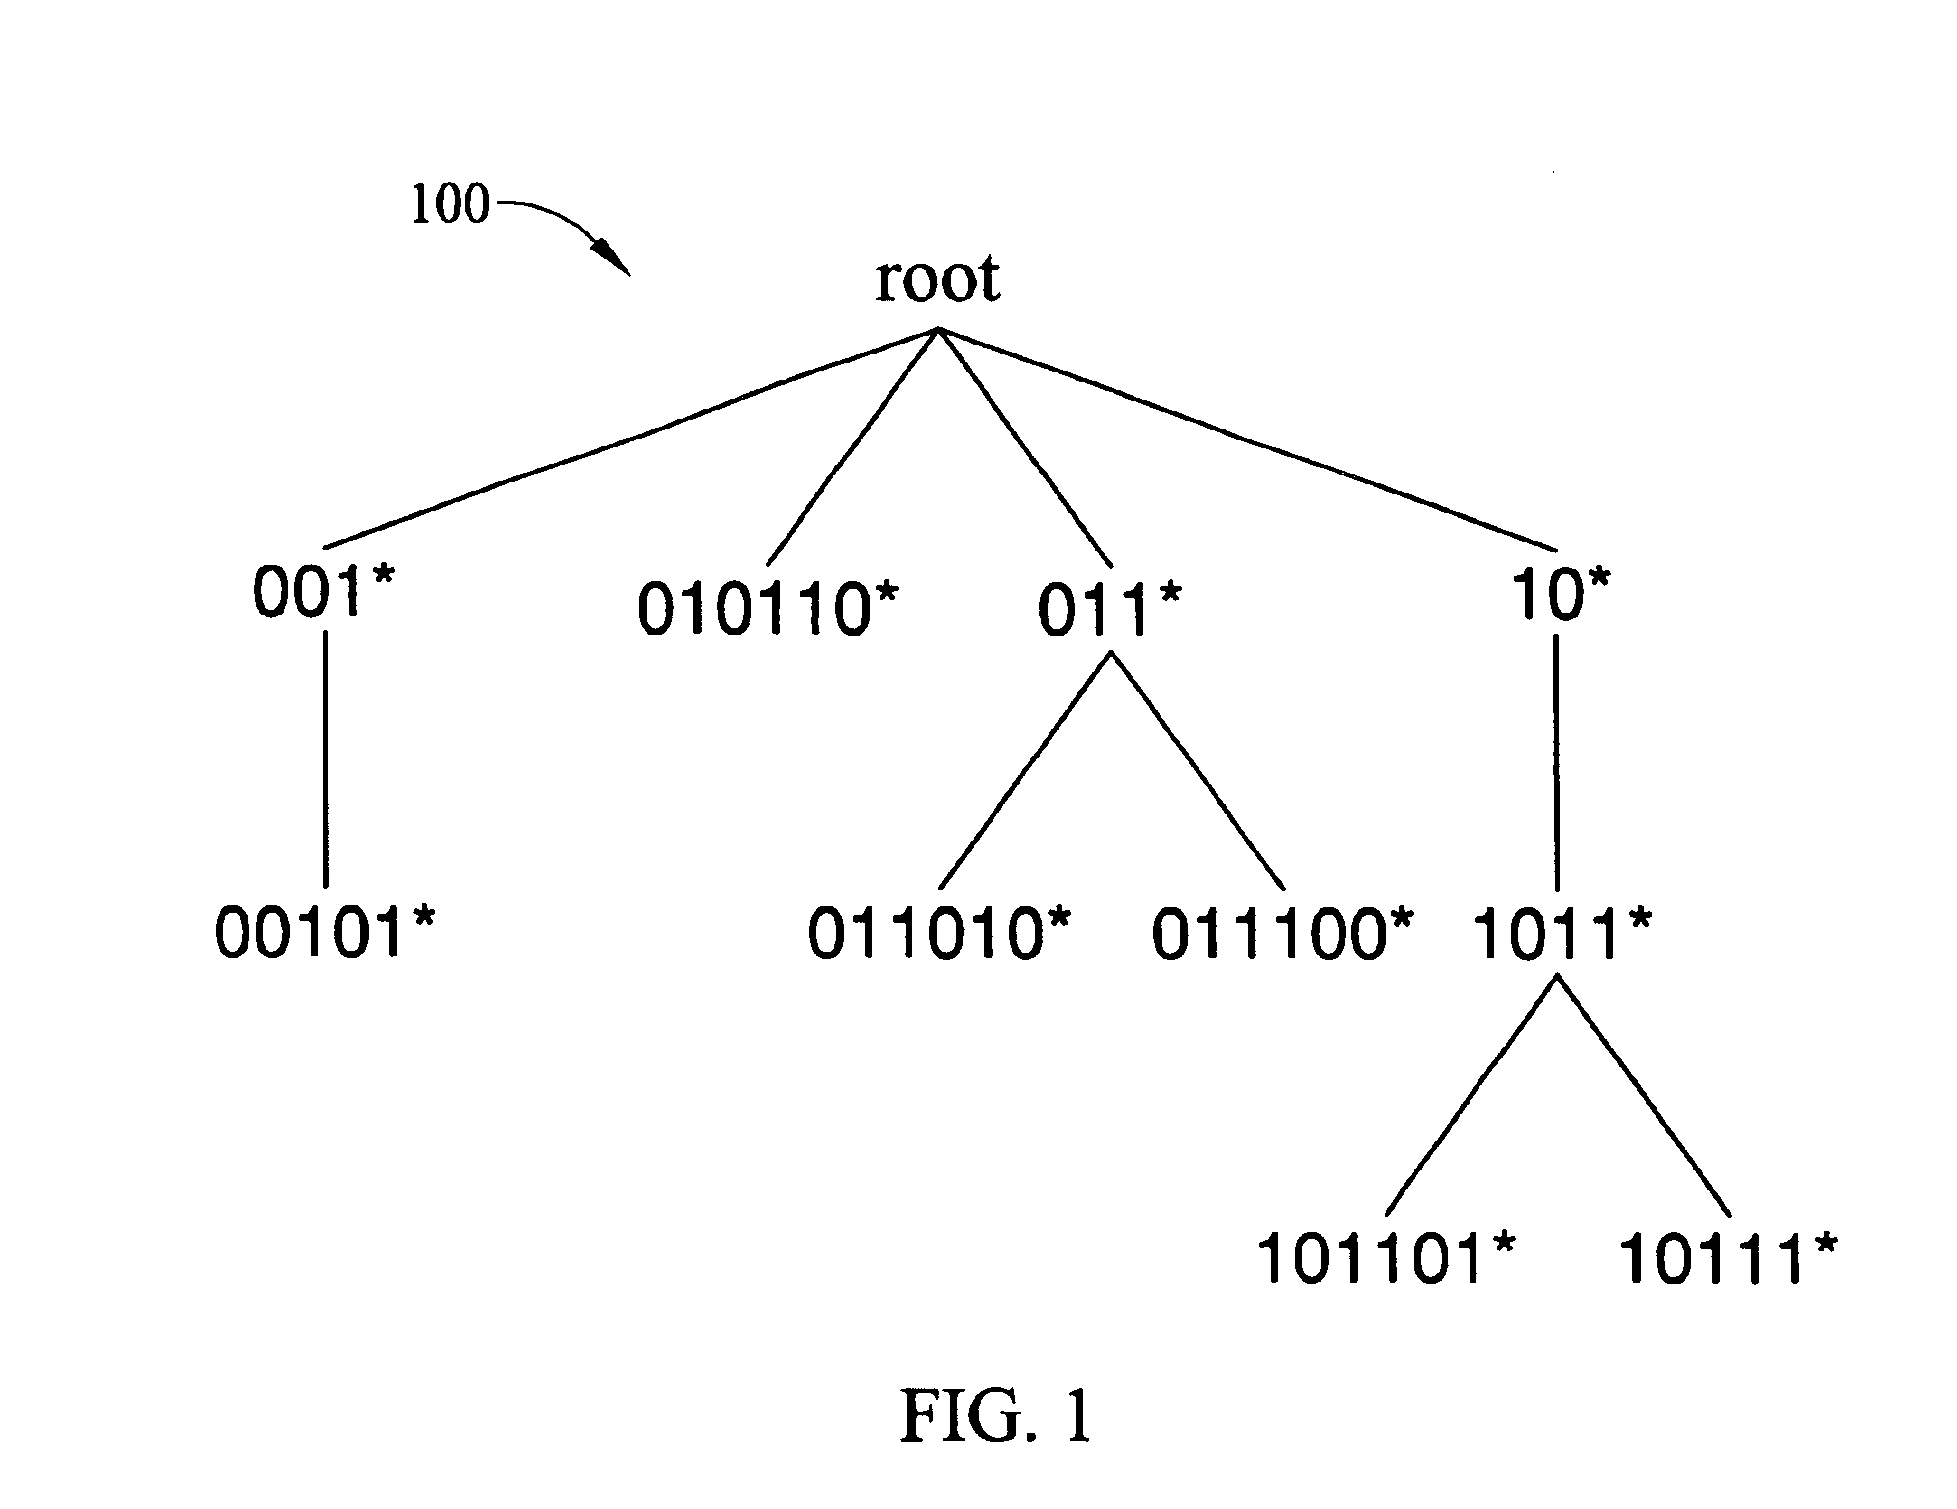 Methods and systems for fast binary network address lookups using parent node information stored in routing table entries